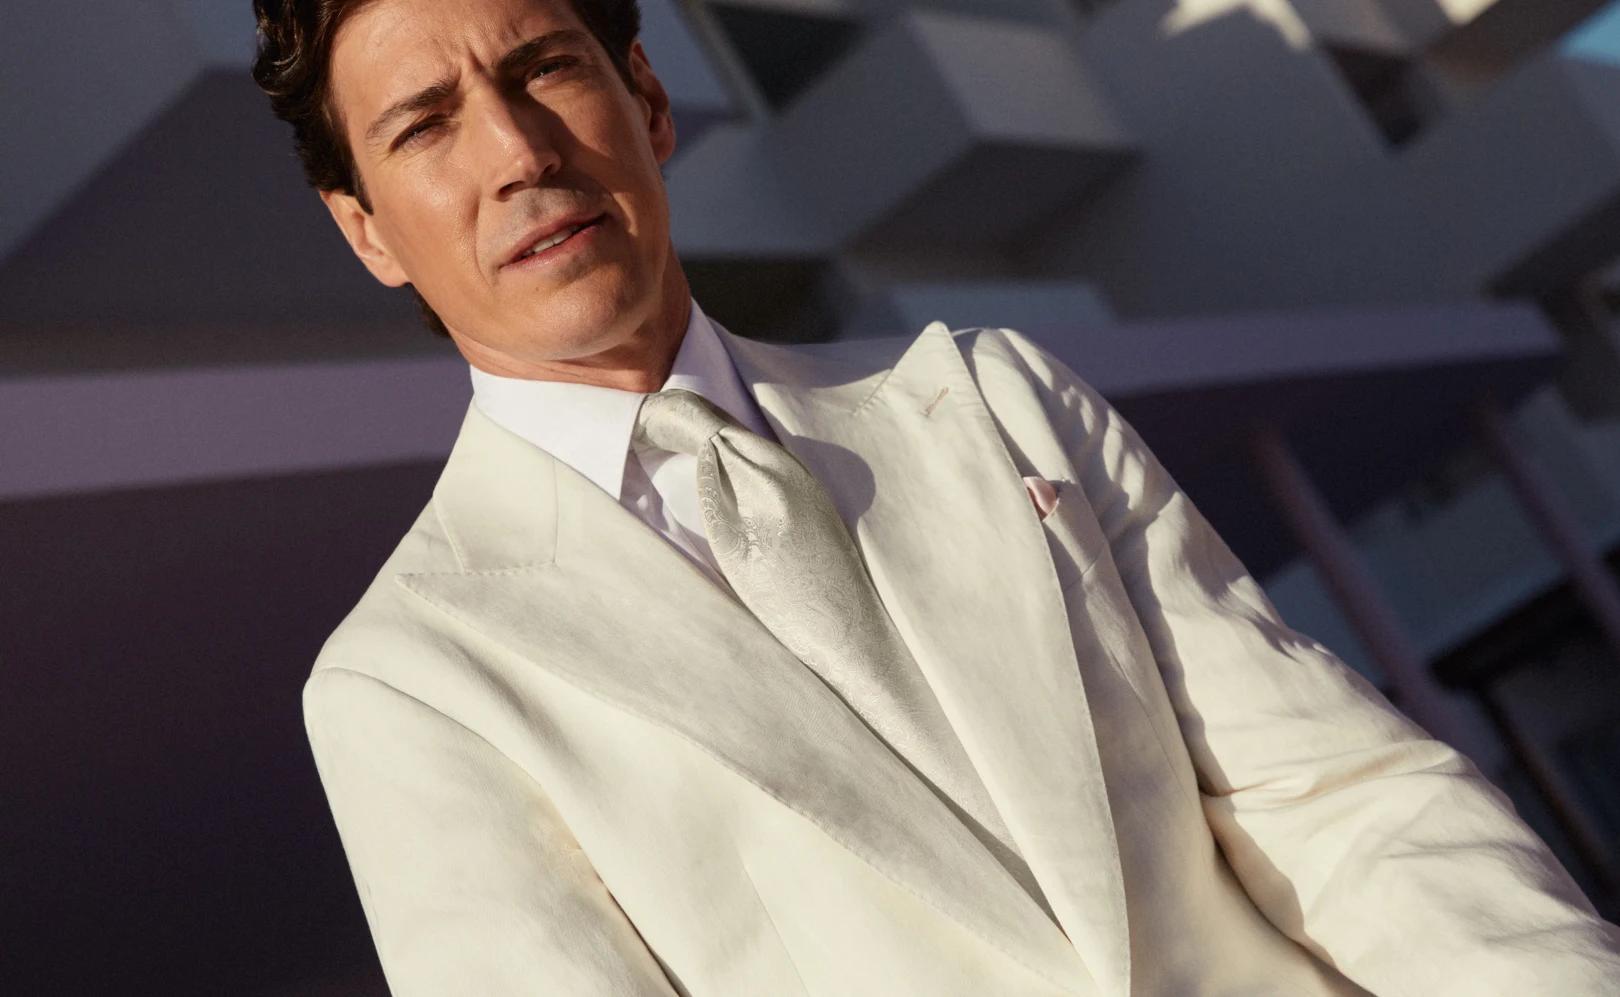 model with white suit and tie